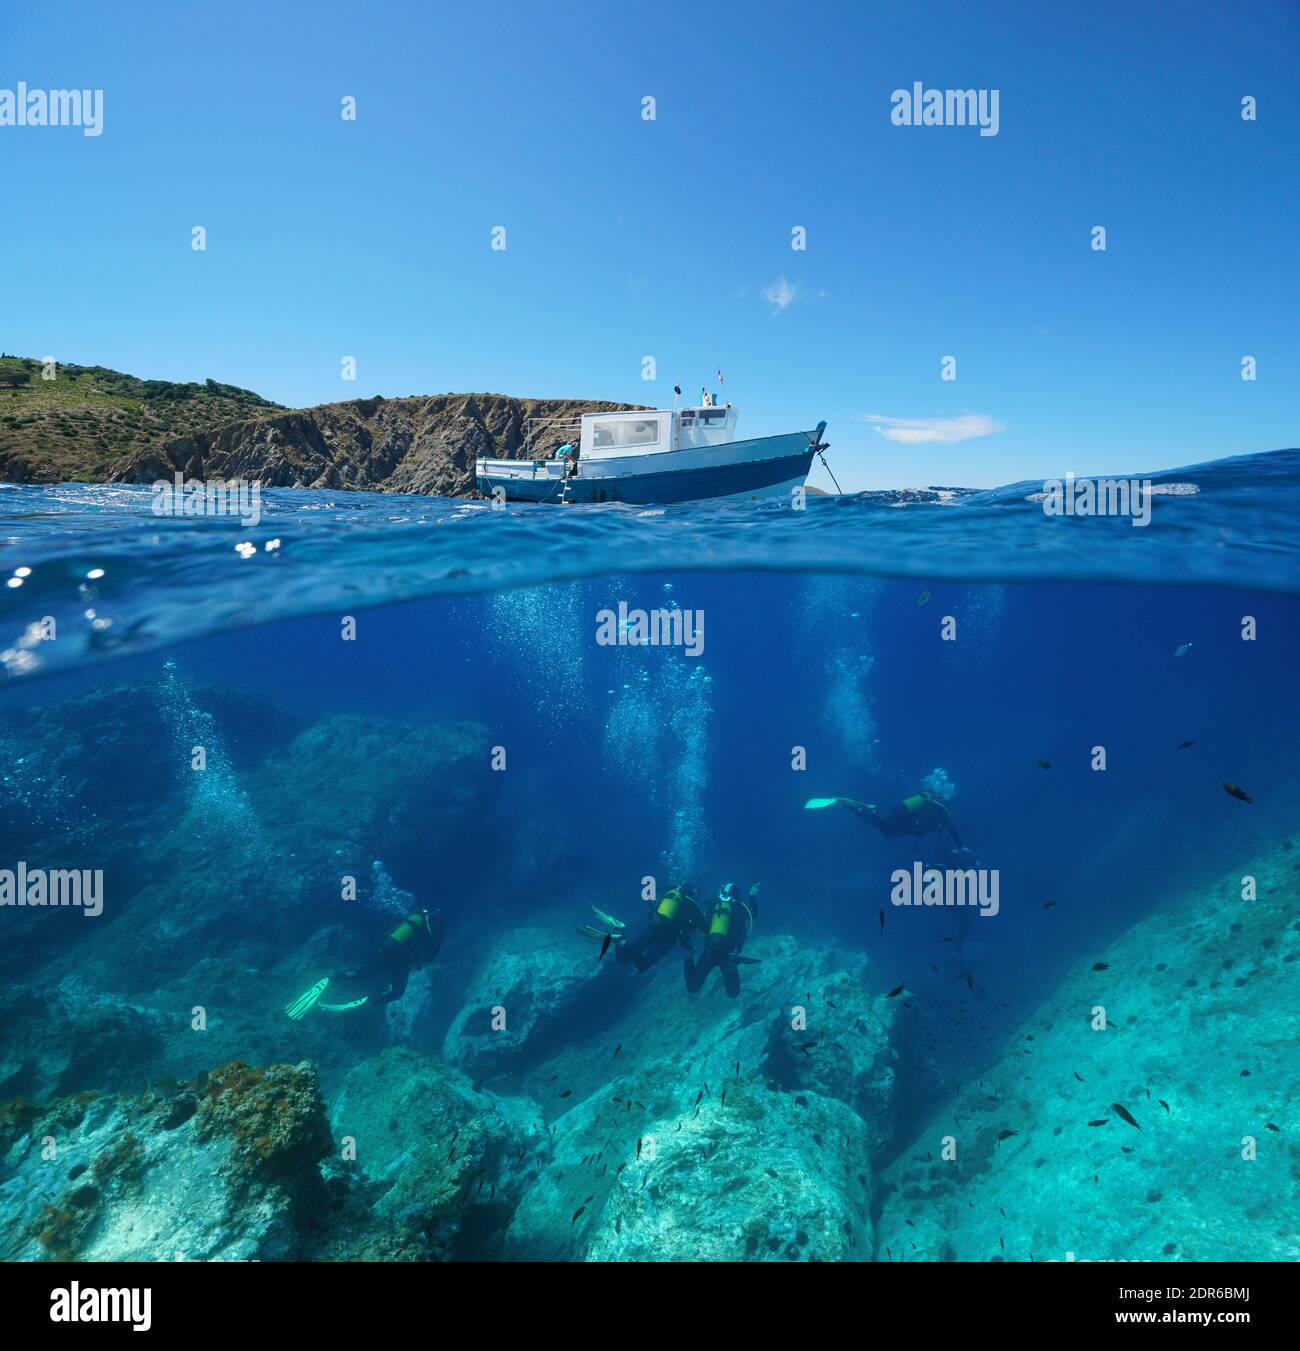 Scuba diving, a boat on the surface and scuba divers underwater, Mediterranean sea, split view over and under water, Marine reserve of Cerbere Banyuls Stock Photo